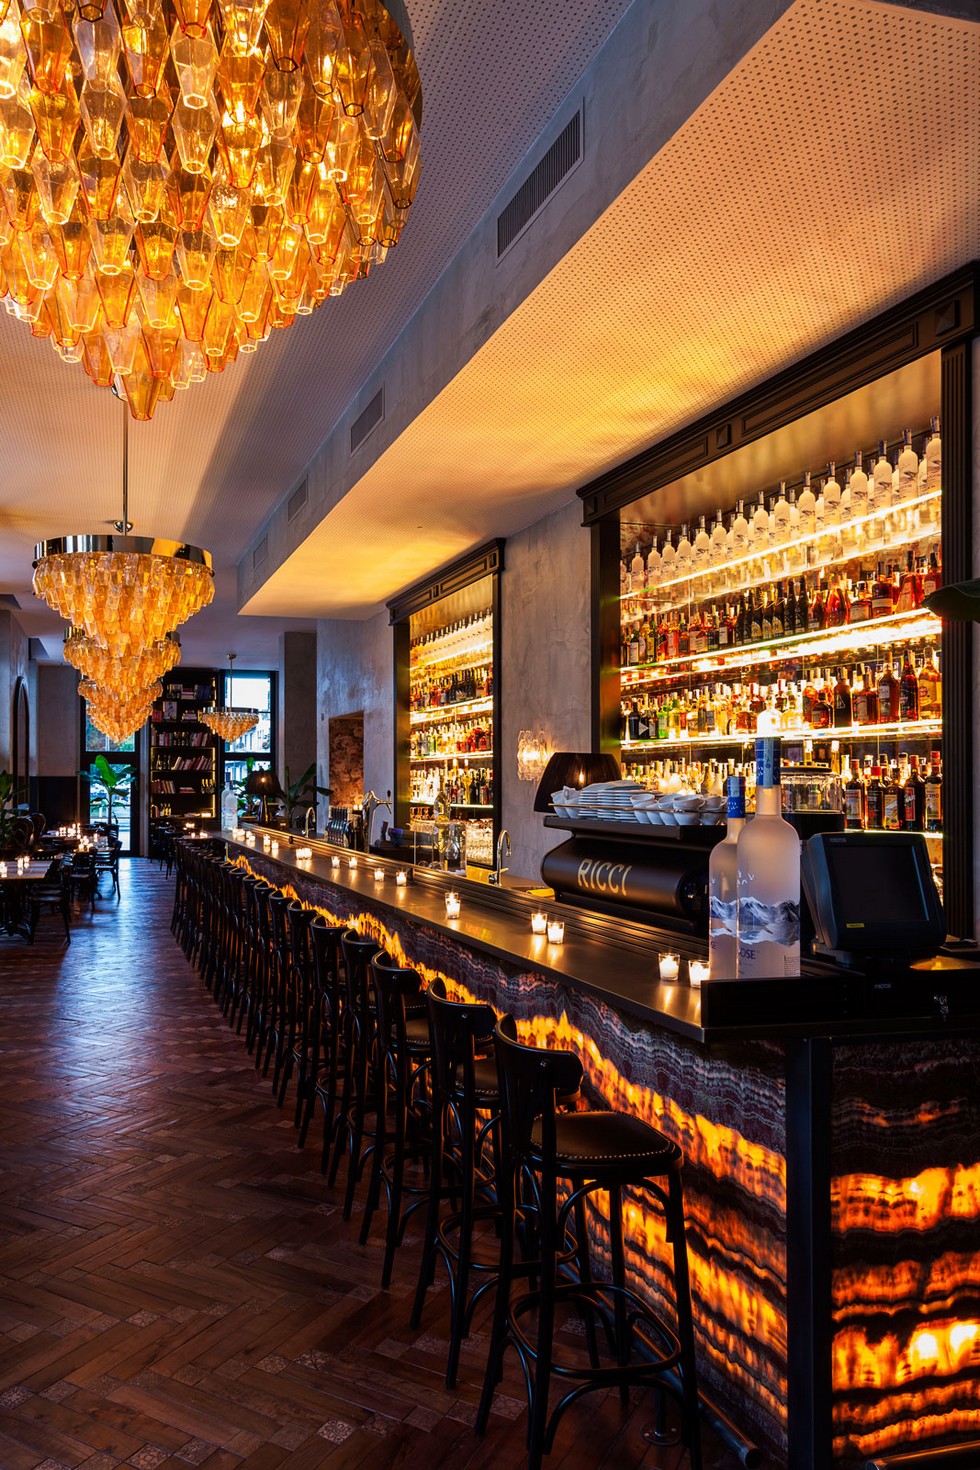 Where to eat in milan Joe Bastianich and his New Milan restaurant, Ricci (6)